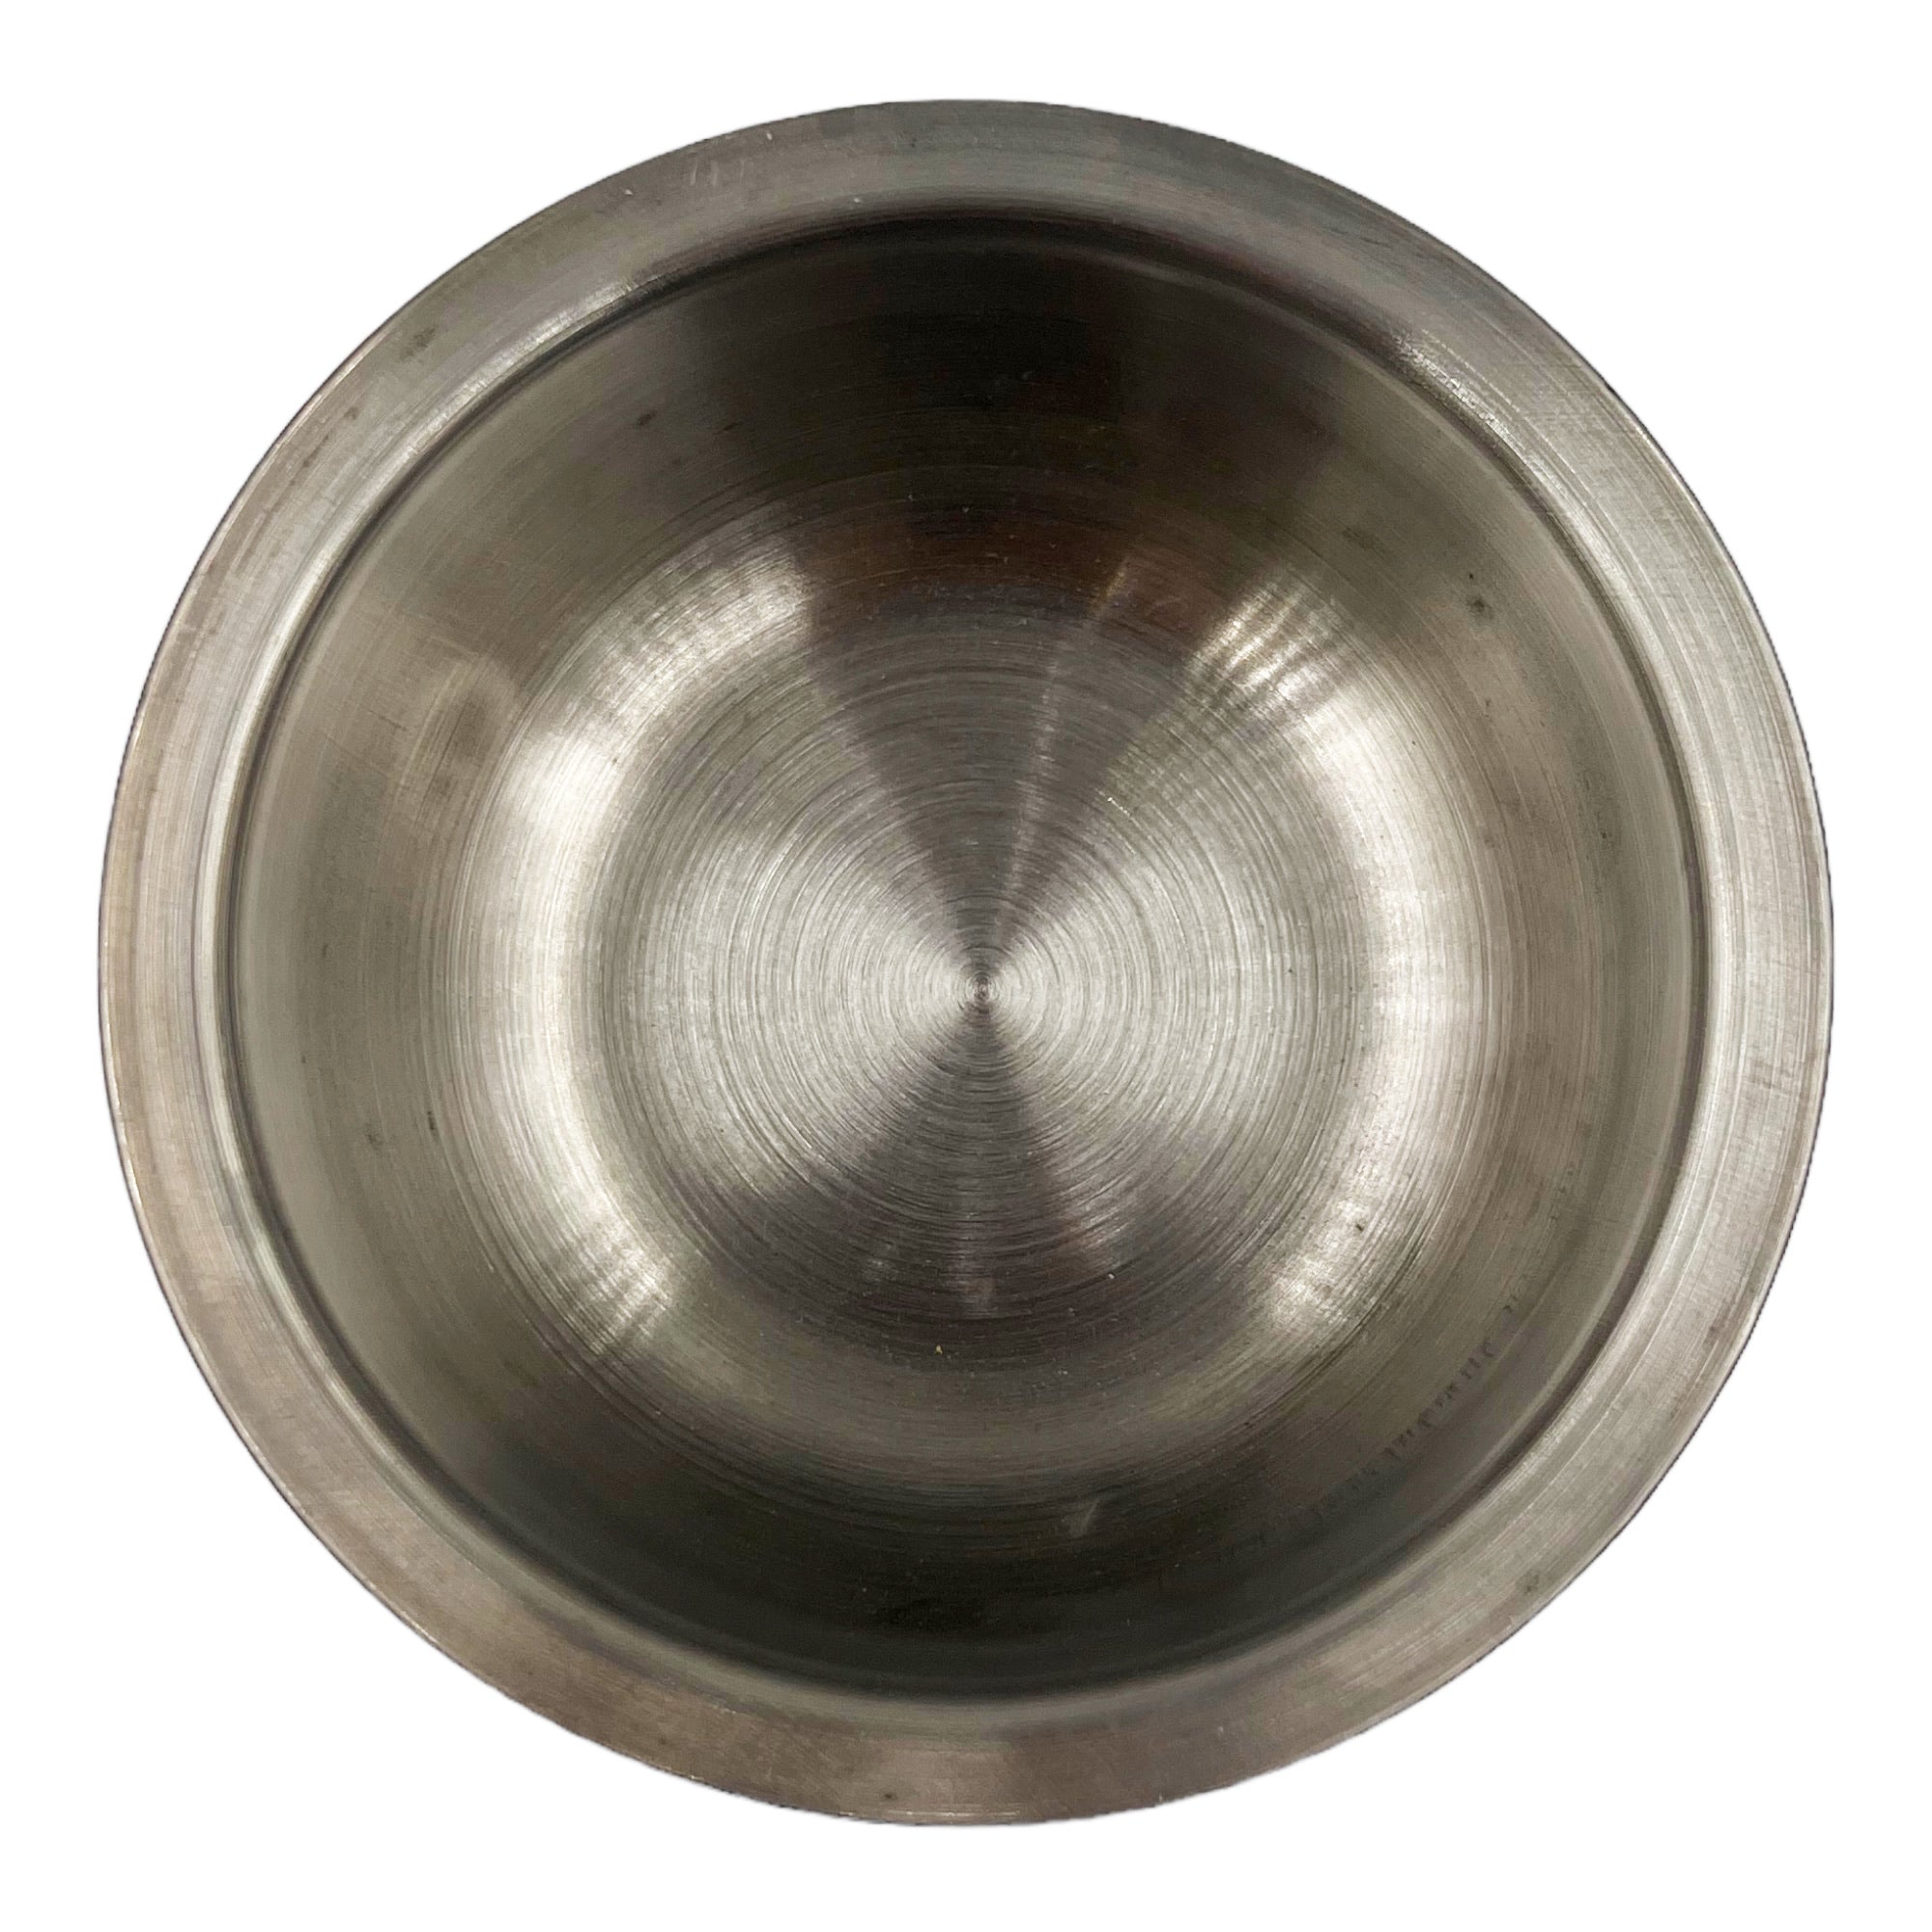 Eson - Stainless Steel Shaving Bowl Iconic Shape 5x12cm - Eson Direct